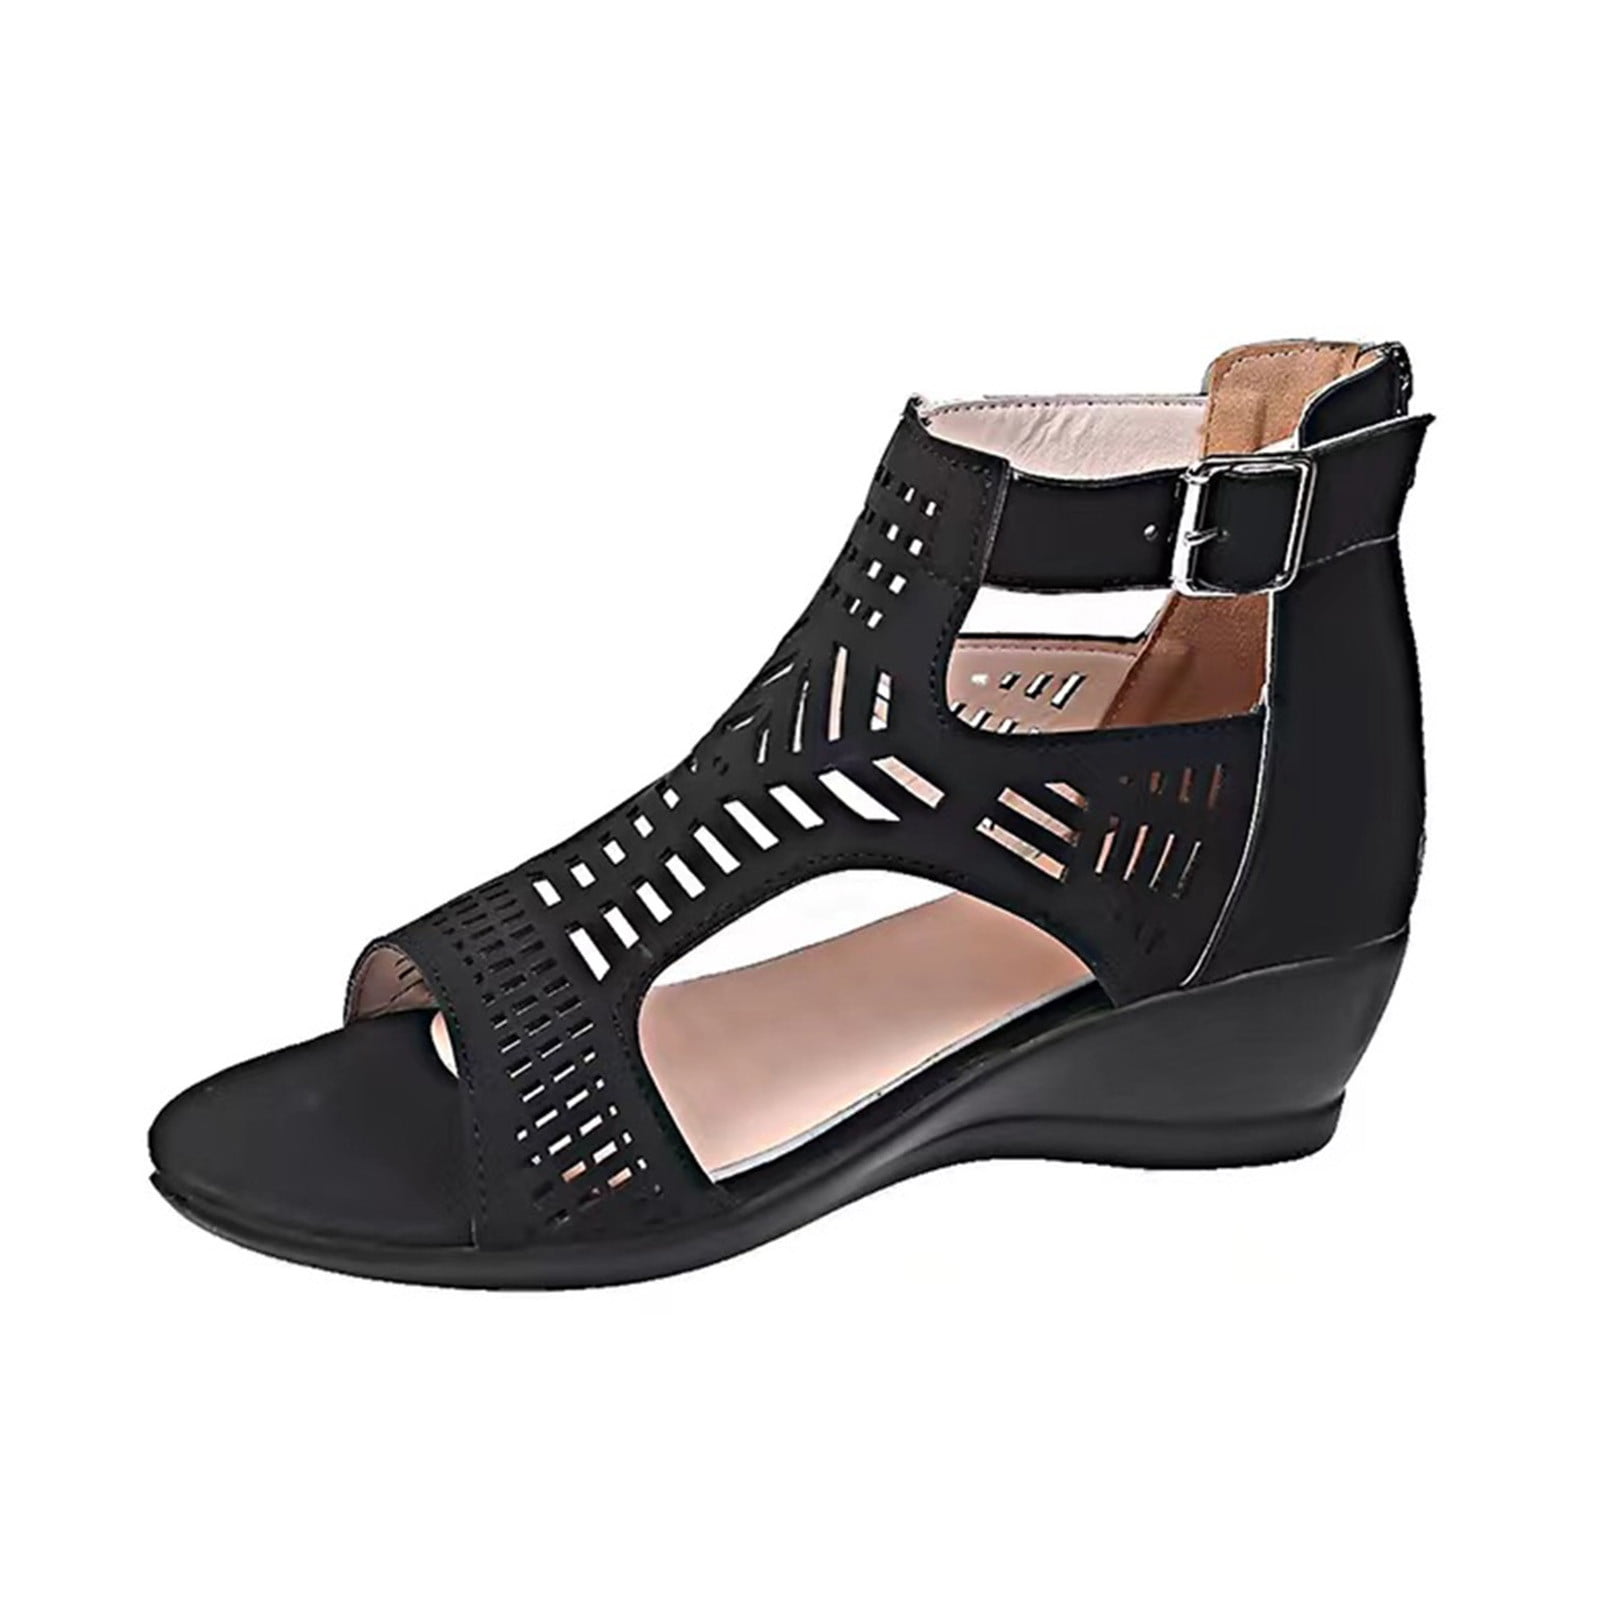 Ladies Wedges For Women Toe Causal Shoes Out Sandals Hollow Peep ...